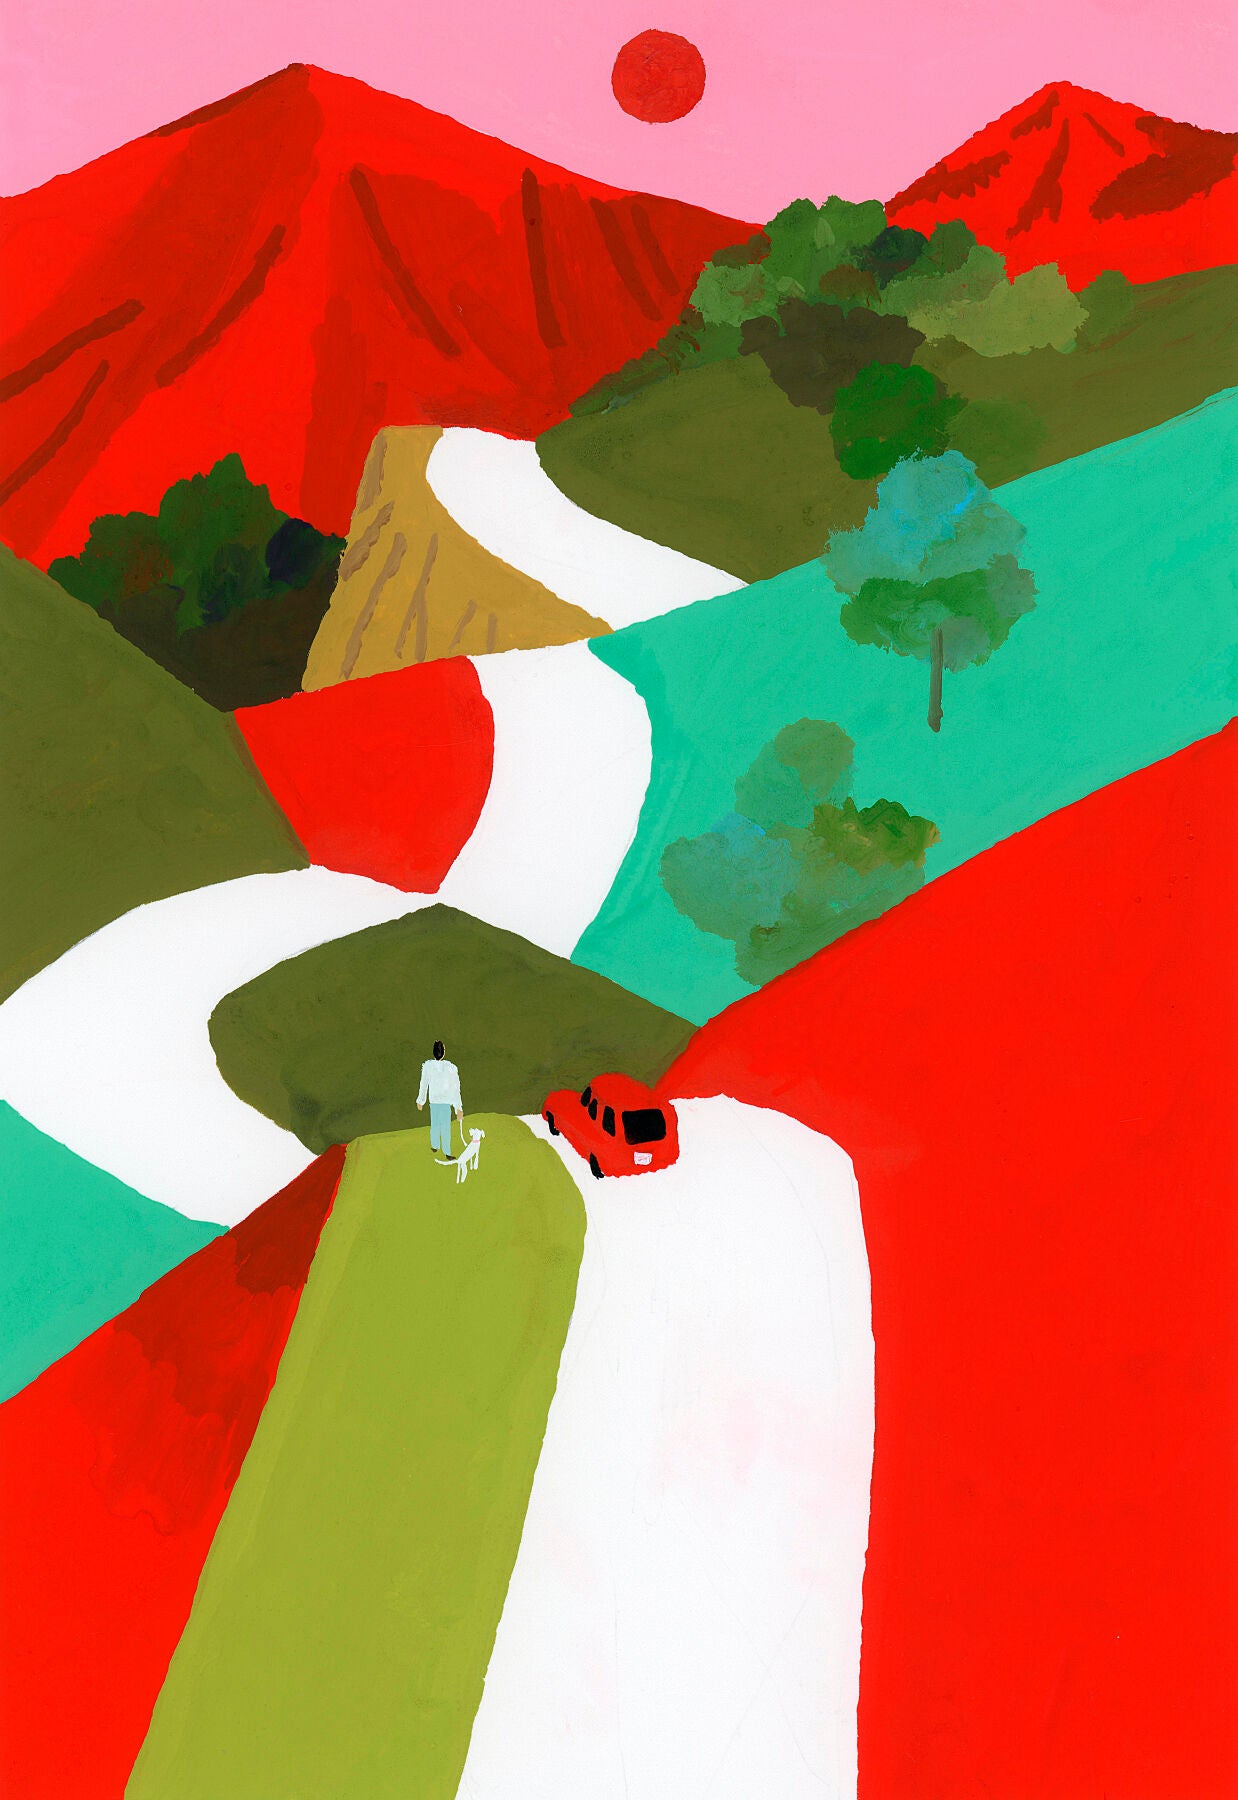 'Red Mountain Path, 2017' by Hiroyuki Izutsu: a vibrant gouache and digital artwork turned into an unframed archival print depicting an abstract aerial landscape. A lone figure stands beside a red car amidst scattered trees, inviting viewers to immerse themselves in the colourful scenery.